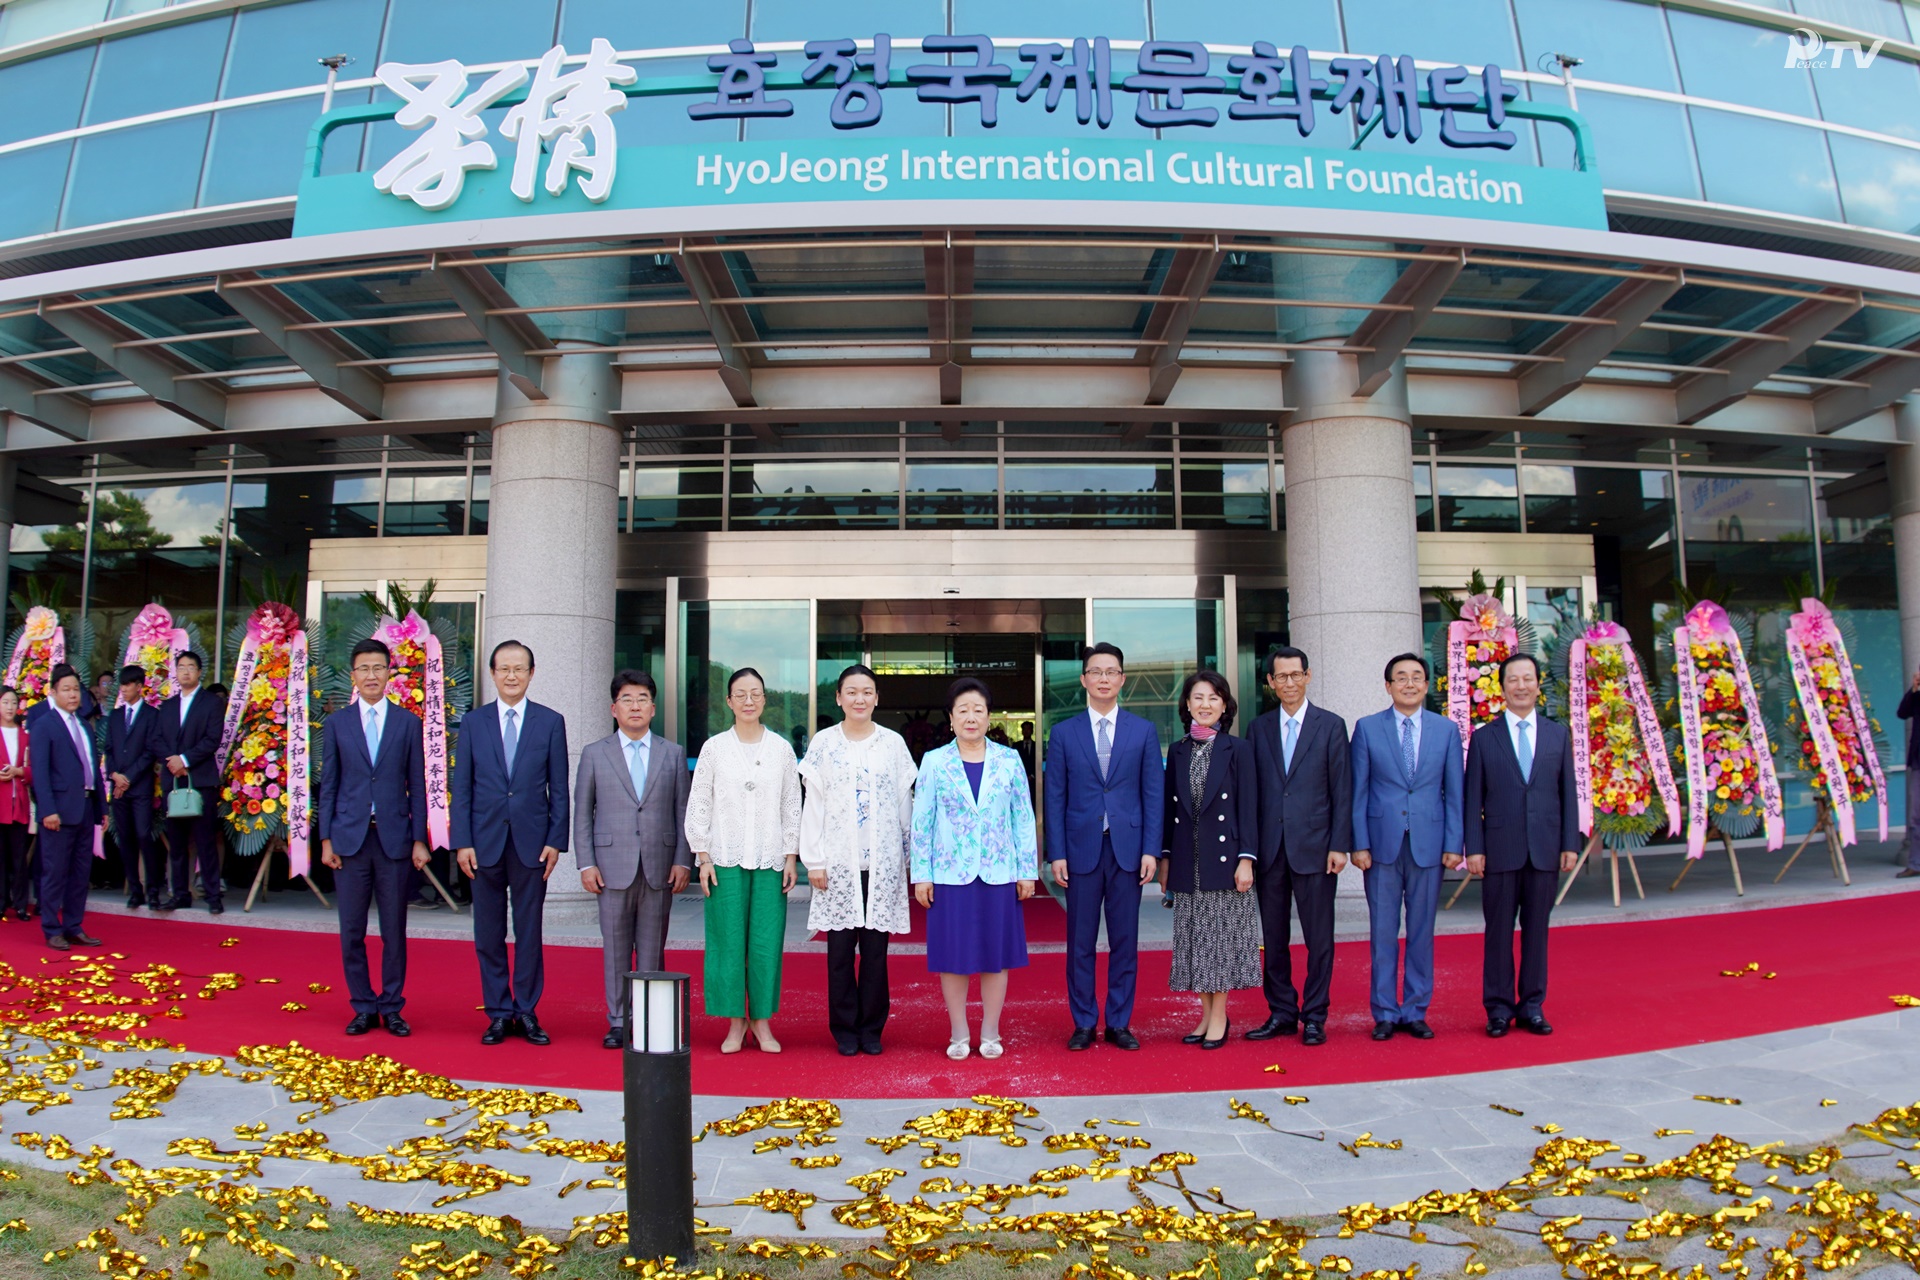 Celebration of the Dedication of the Hyojeong Cultural Center and 11th Moon Hyo Jin Music Festival (11 August, 2019)